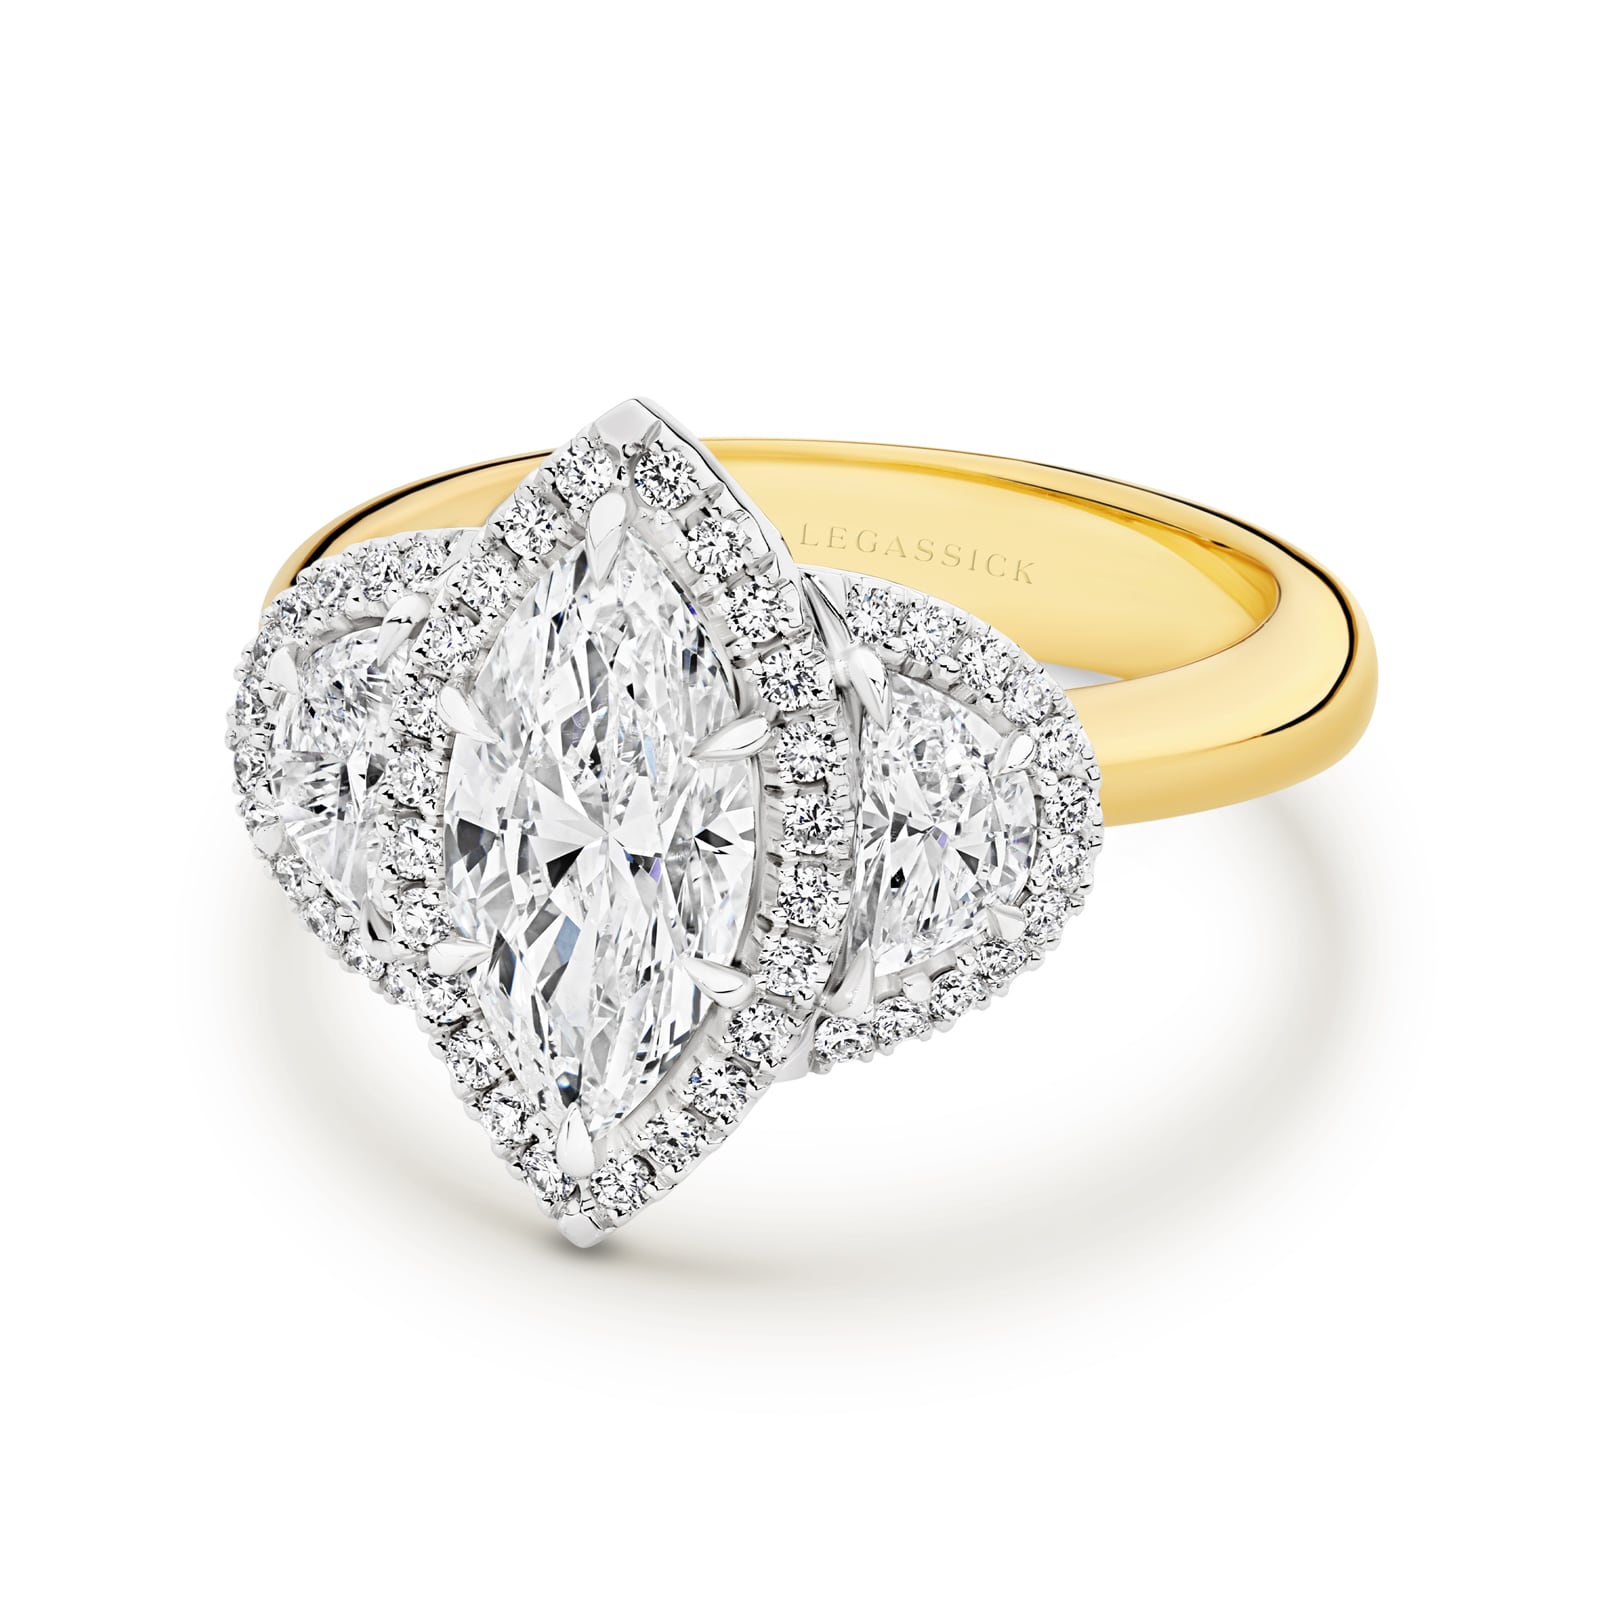 Monique is a stunning diamond ring with a 2ct marquise cut centre stone. She was designed and handcrafted by LeGassick's Master Jewellers, Gold Coast, Australia.